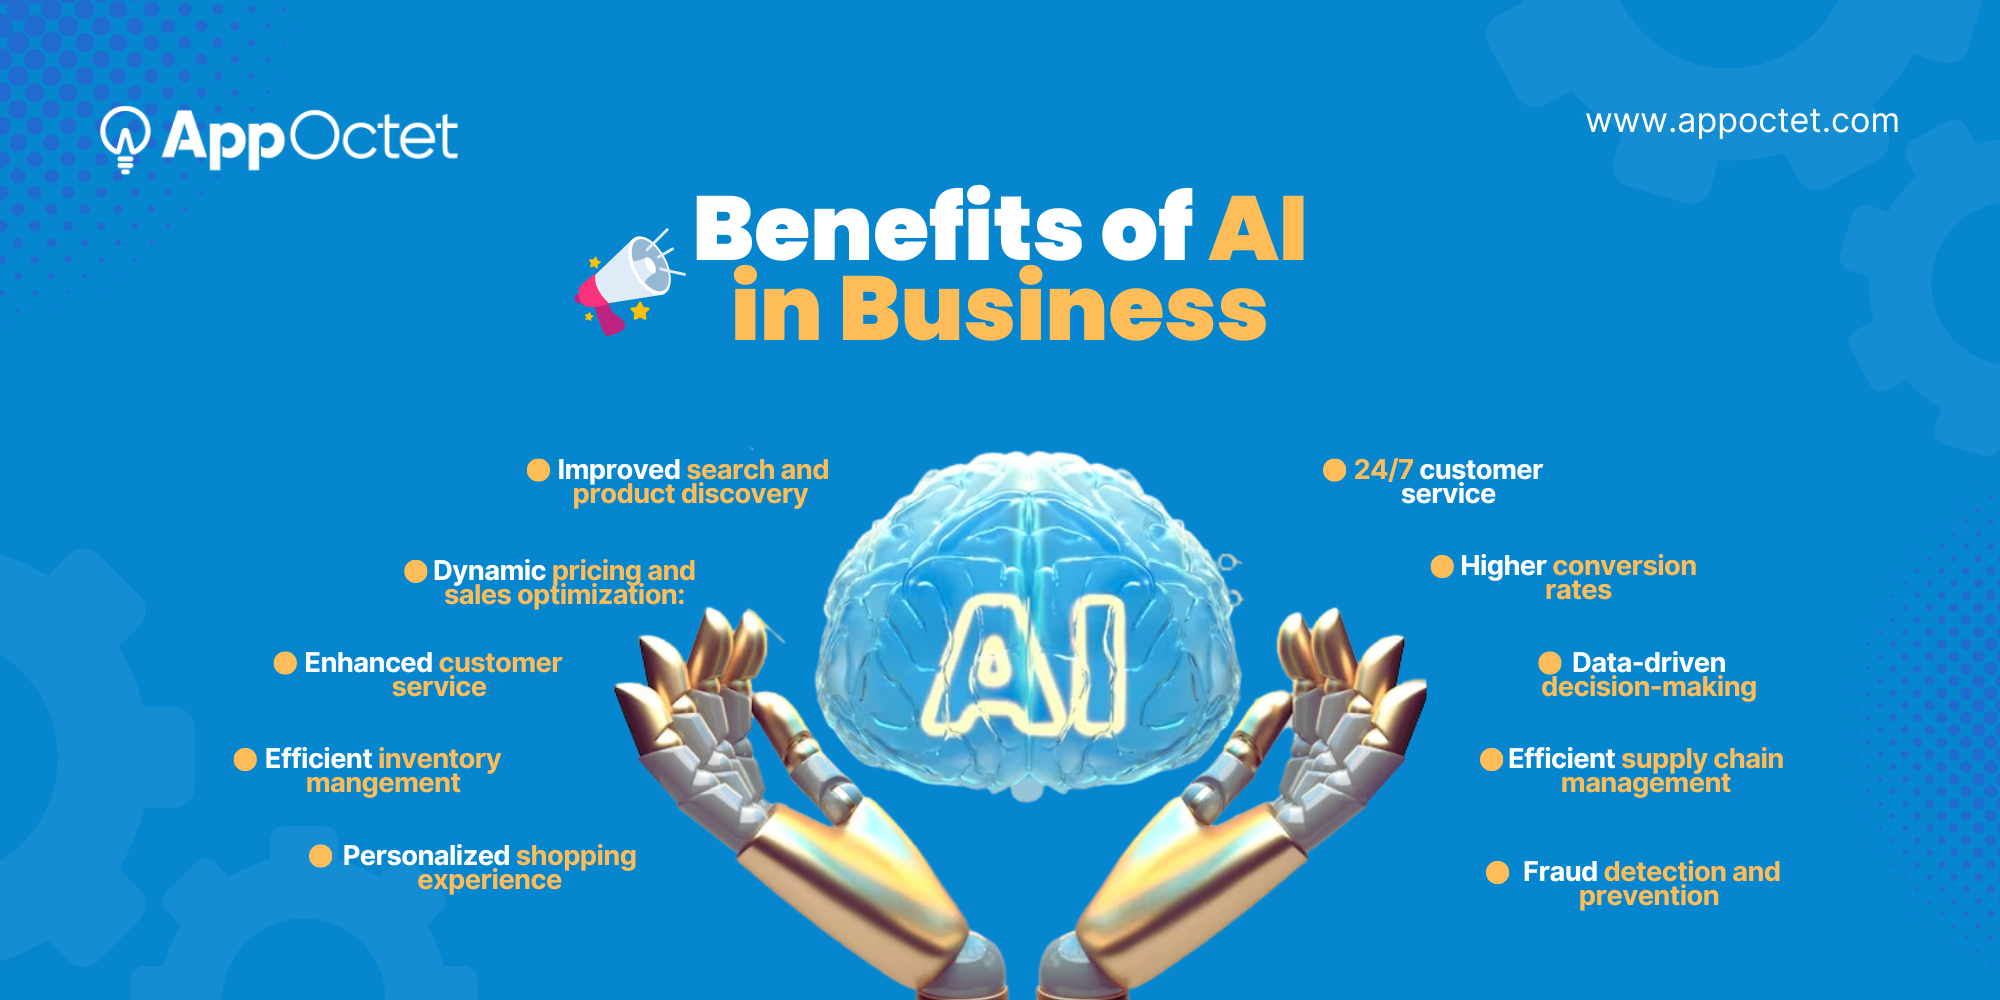 Benefits of AI in businesses